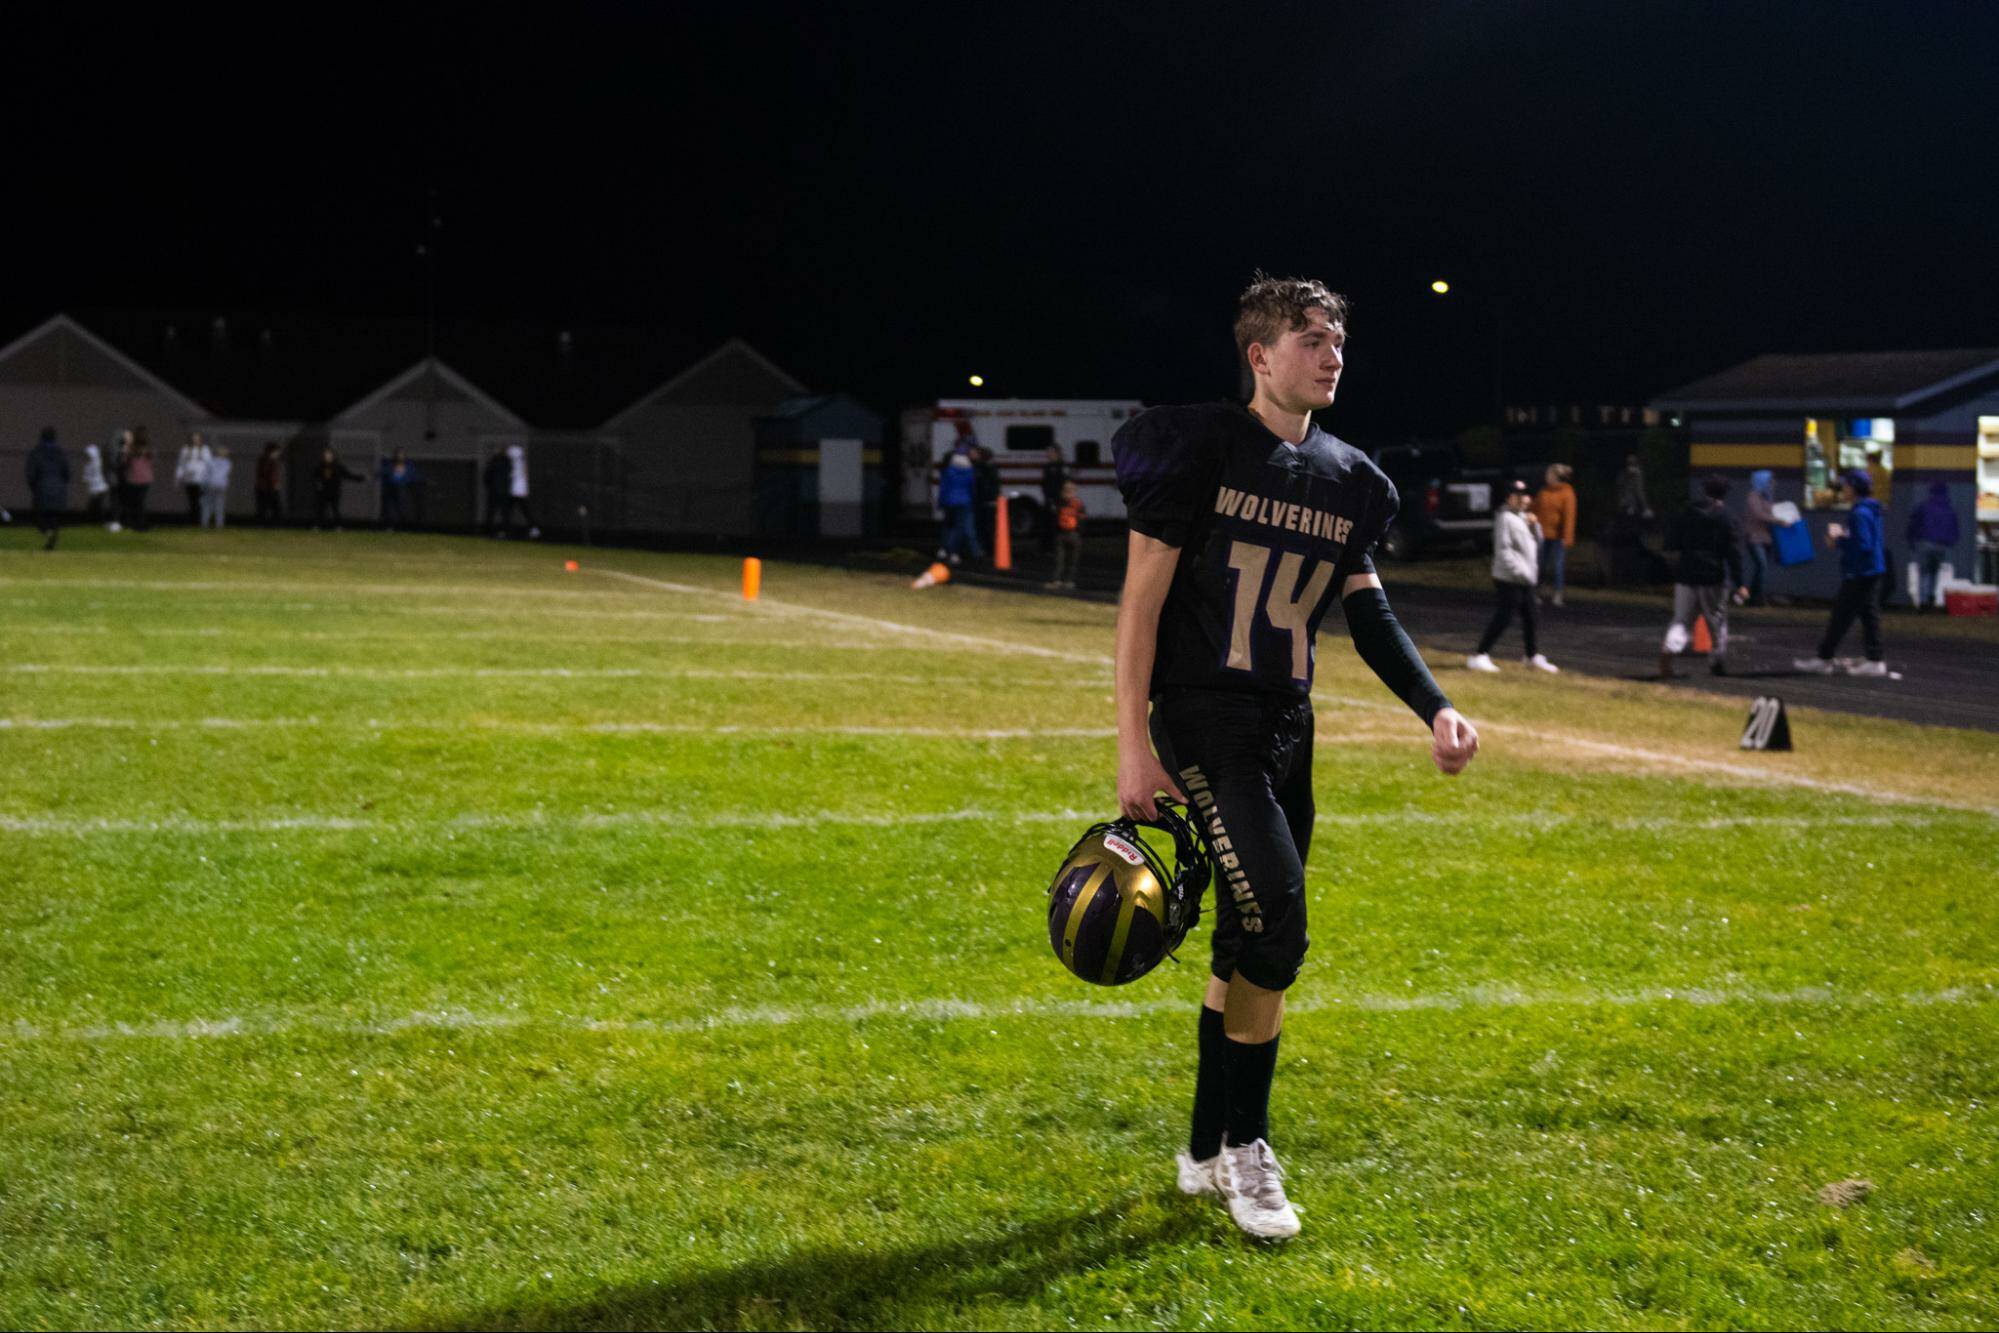 Contributed photo by Kathryn Wheeler
Freshman wide receiver and defensive back Landon Weidmaier exits the field after the upset